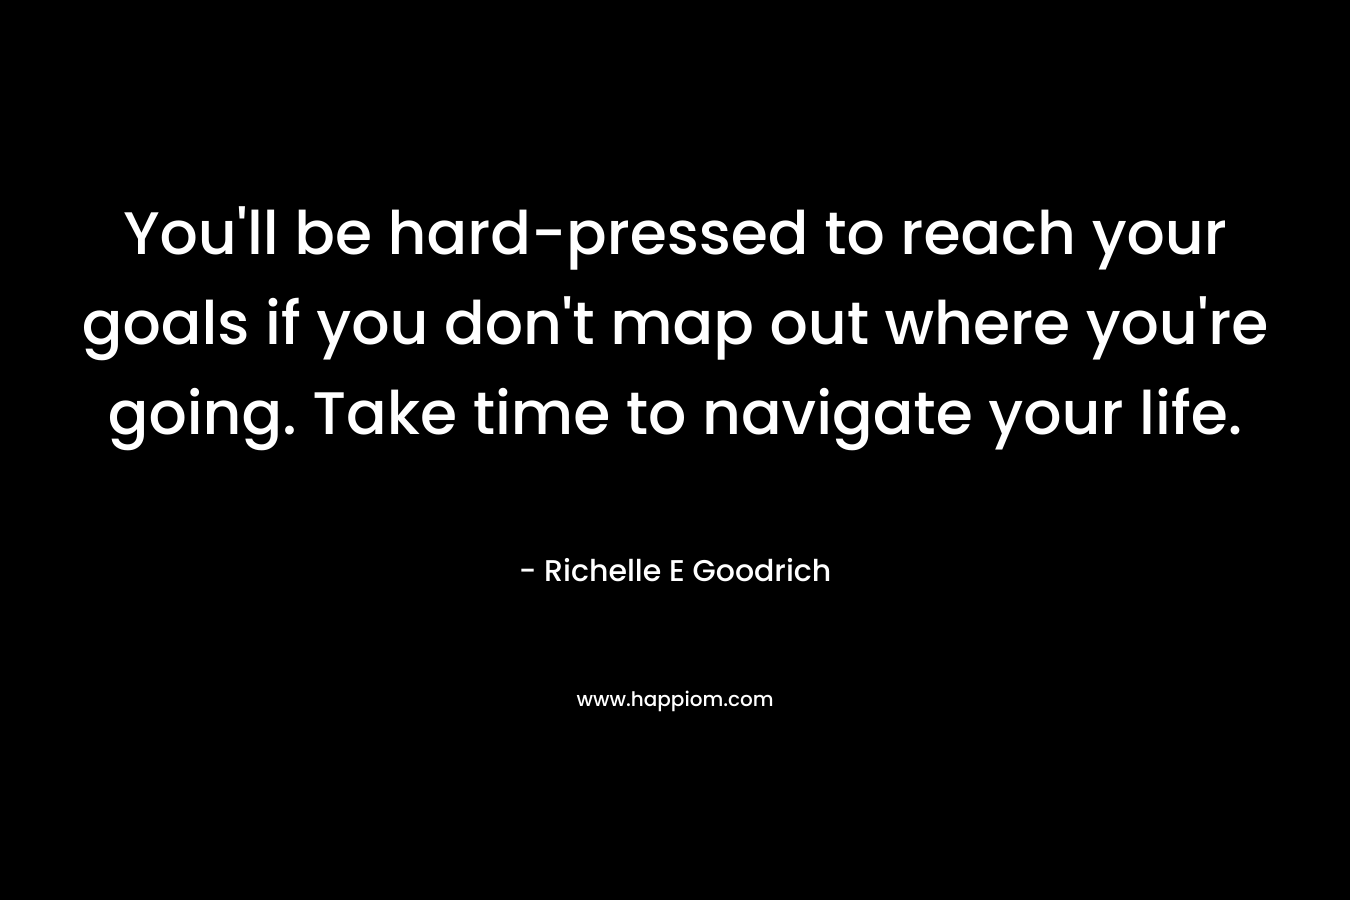 You’ll be hard-pressed to reach your goals if you don’t map out where you’re going. Take time to navigate your life. – Richelle E Goodrich